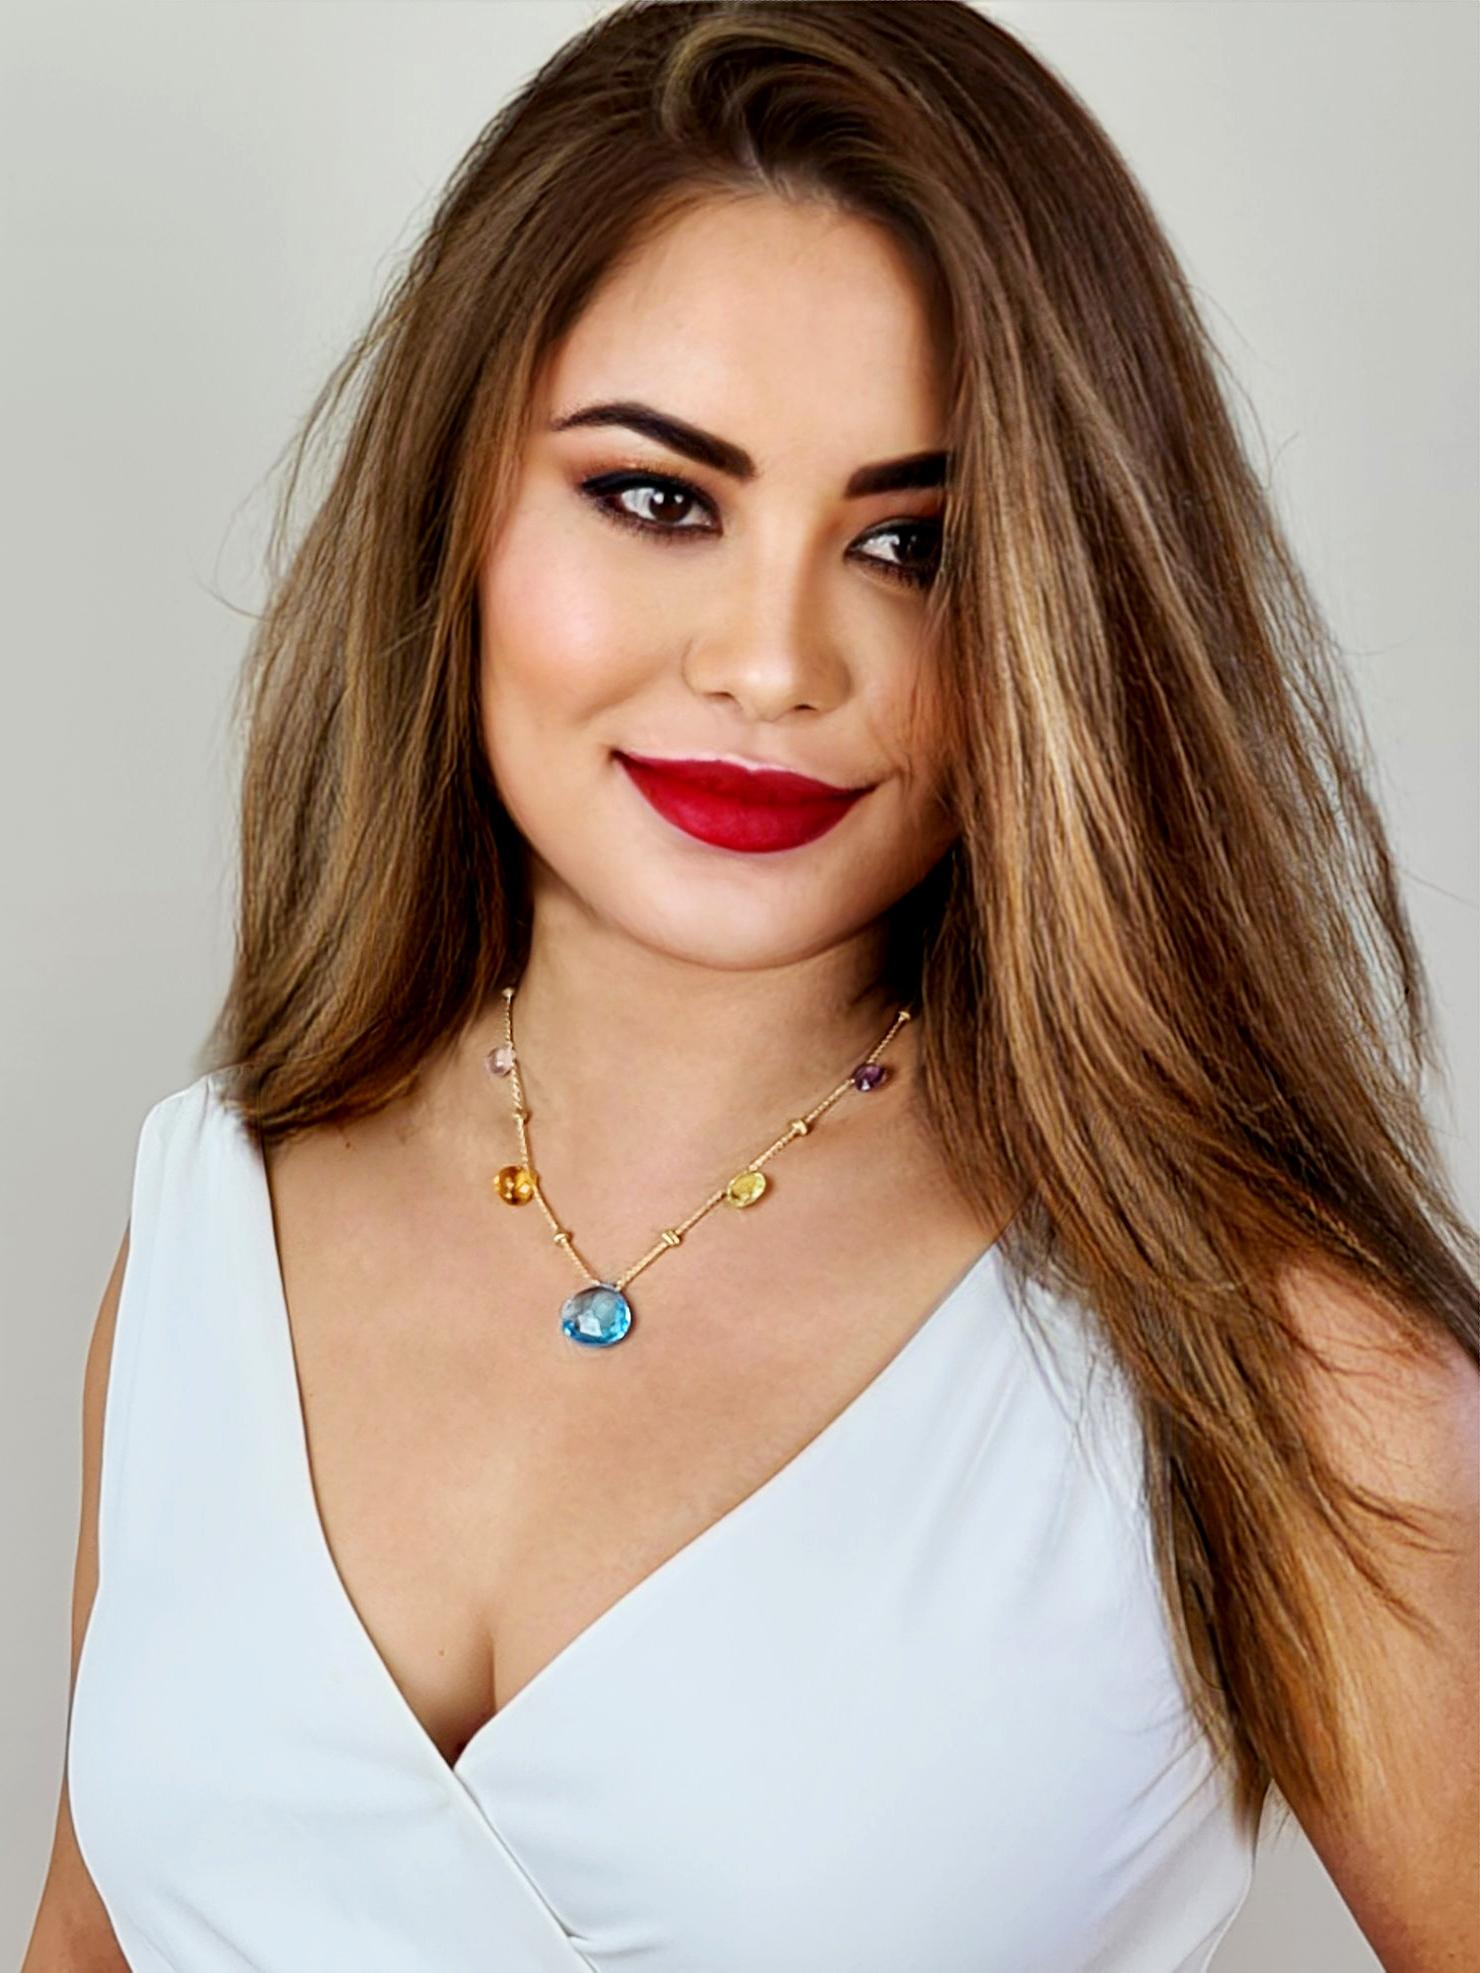 18K yellow gold short graduated necklace with tabeez cut multi-colored semi-precious gemstones set in 18 carat yellow gold. A timeless and playful Marco Bicego classic, this Paradise Multicolor Gemstone Necklace is hand engraved by Italian artisans